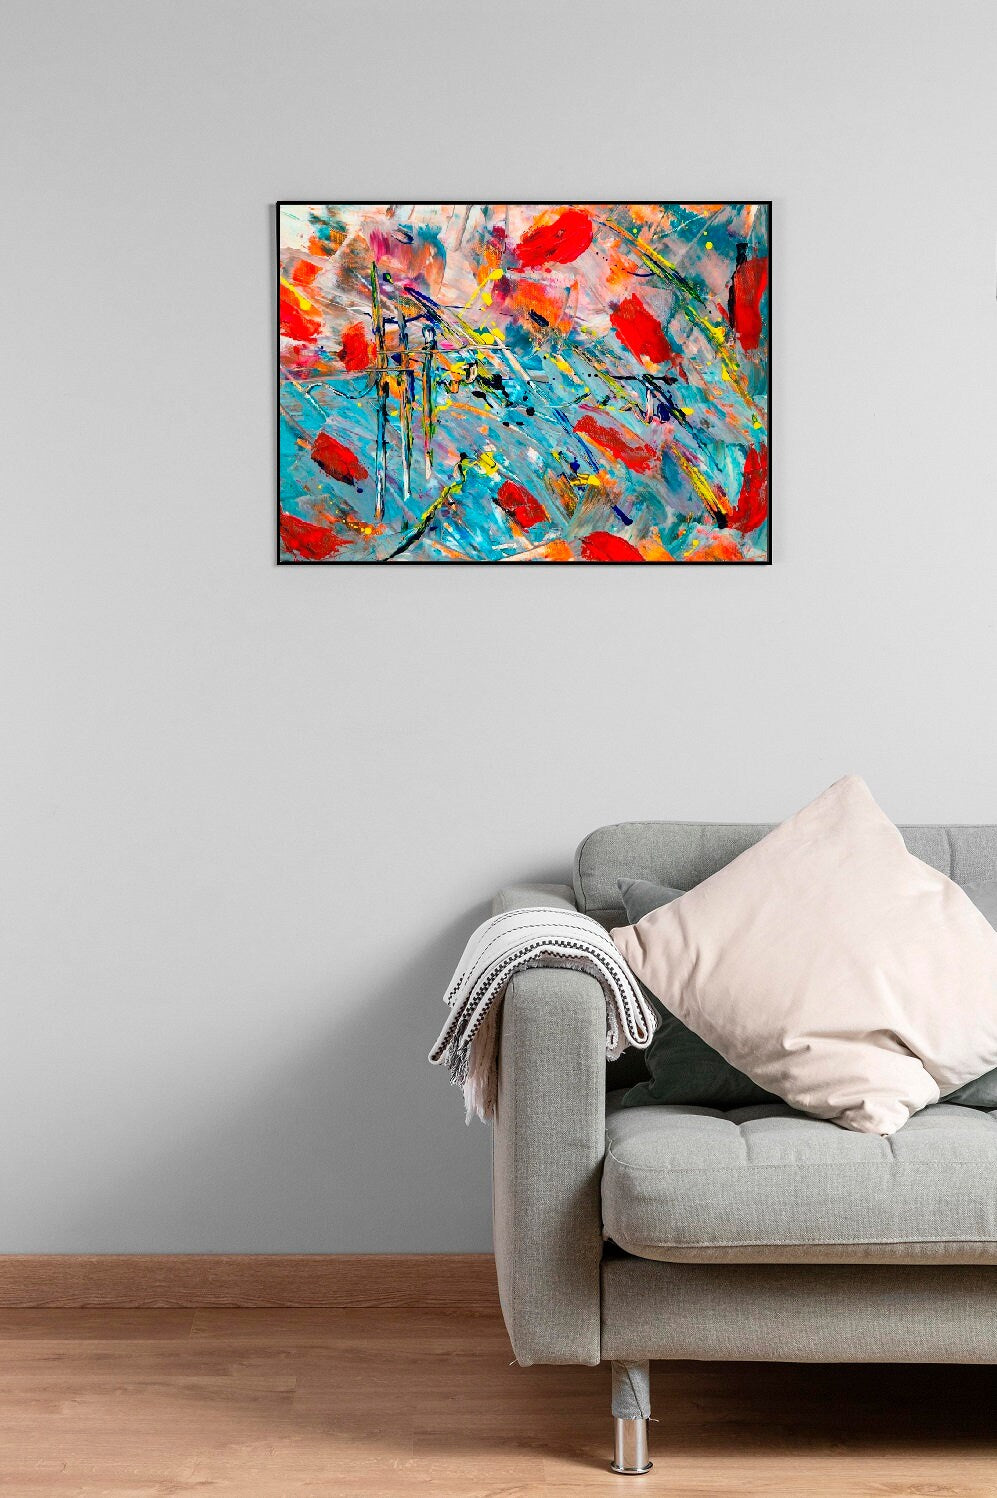 Modern oil painting hanging wall art, abstract multi colored framed art print in floating frame, extra large colorful abstract wall art